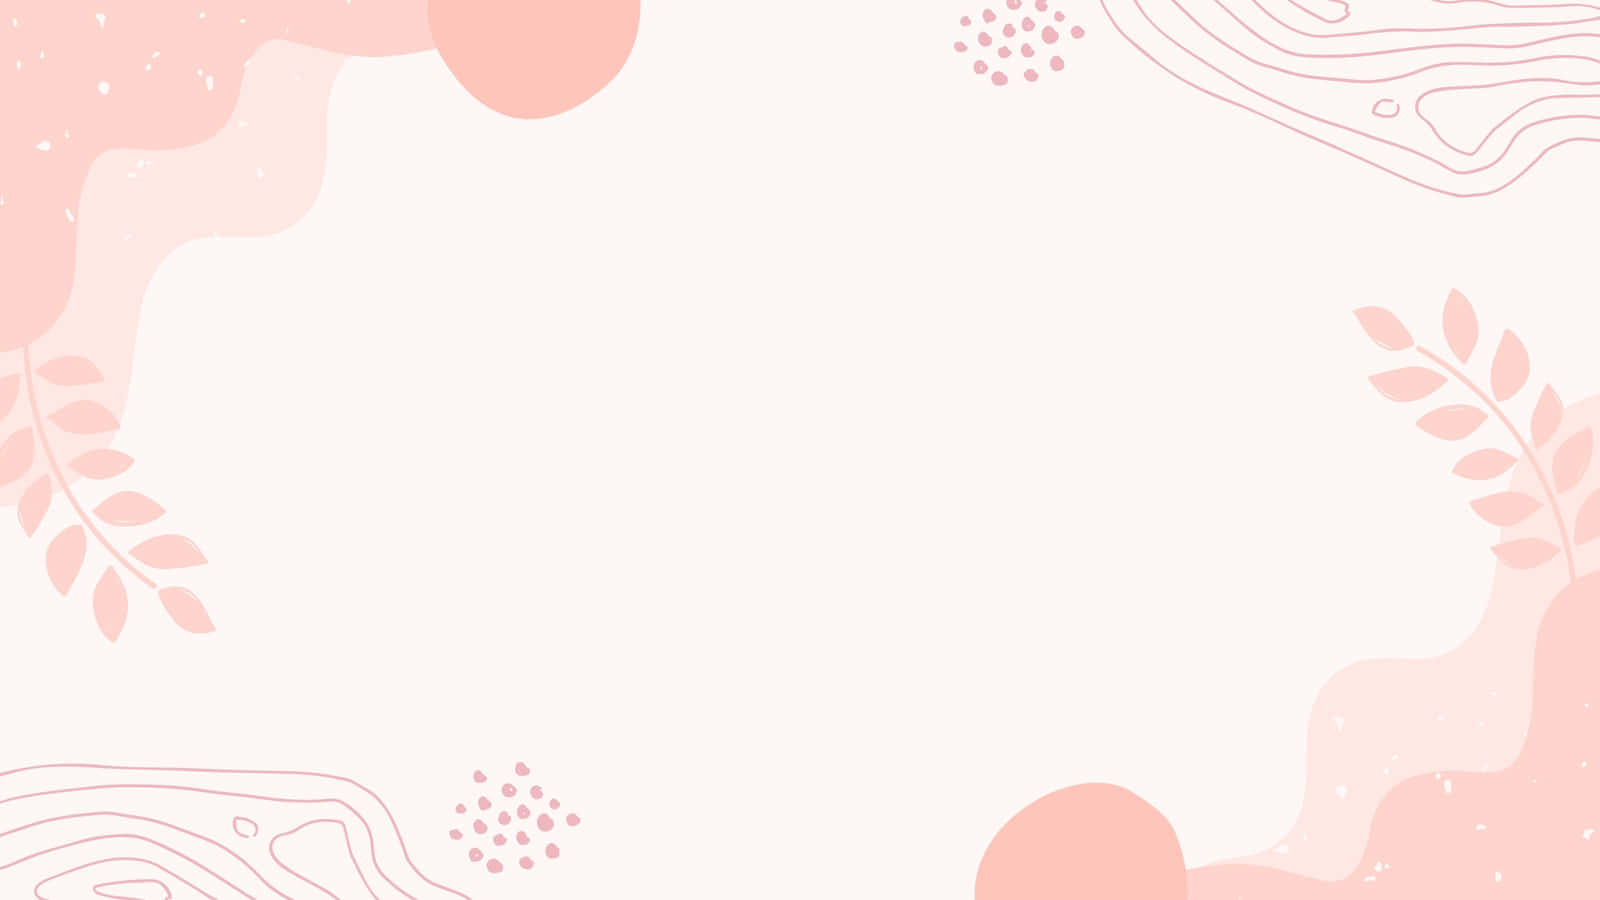 A bright and simple pink background